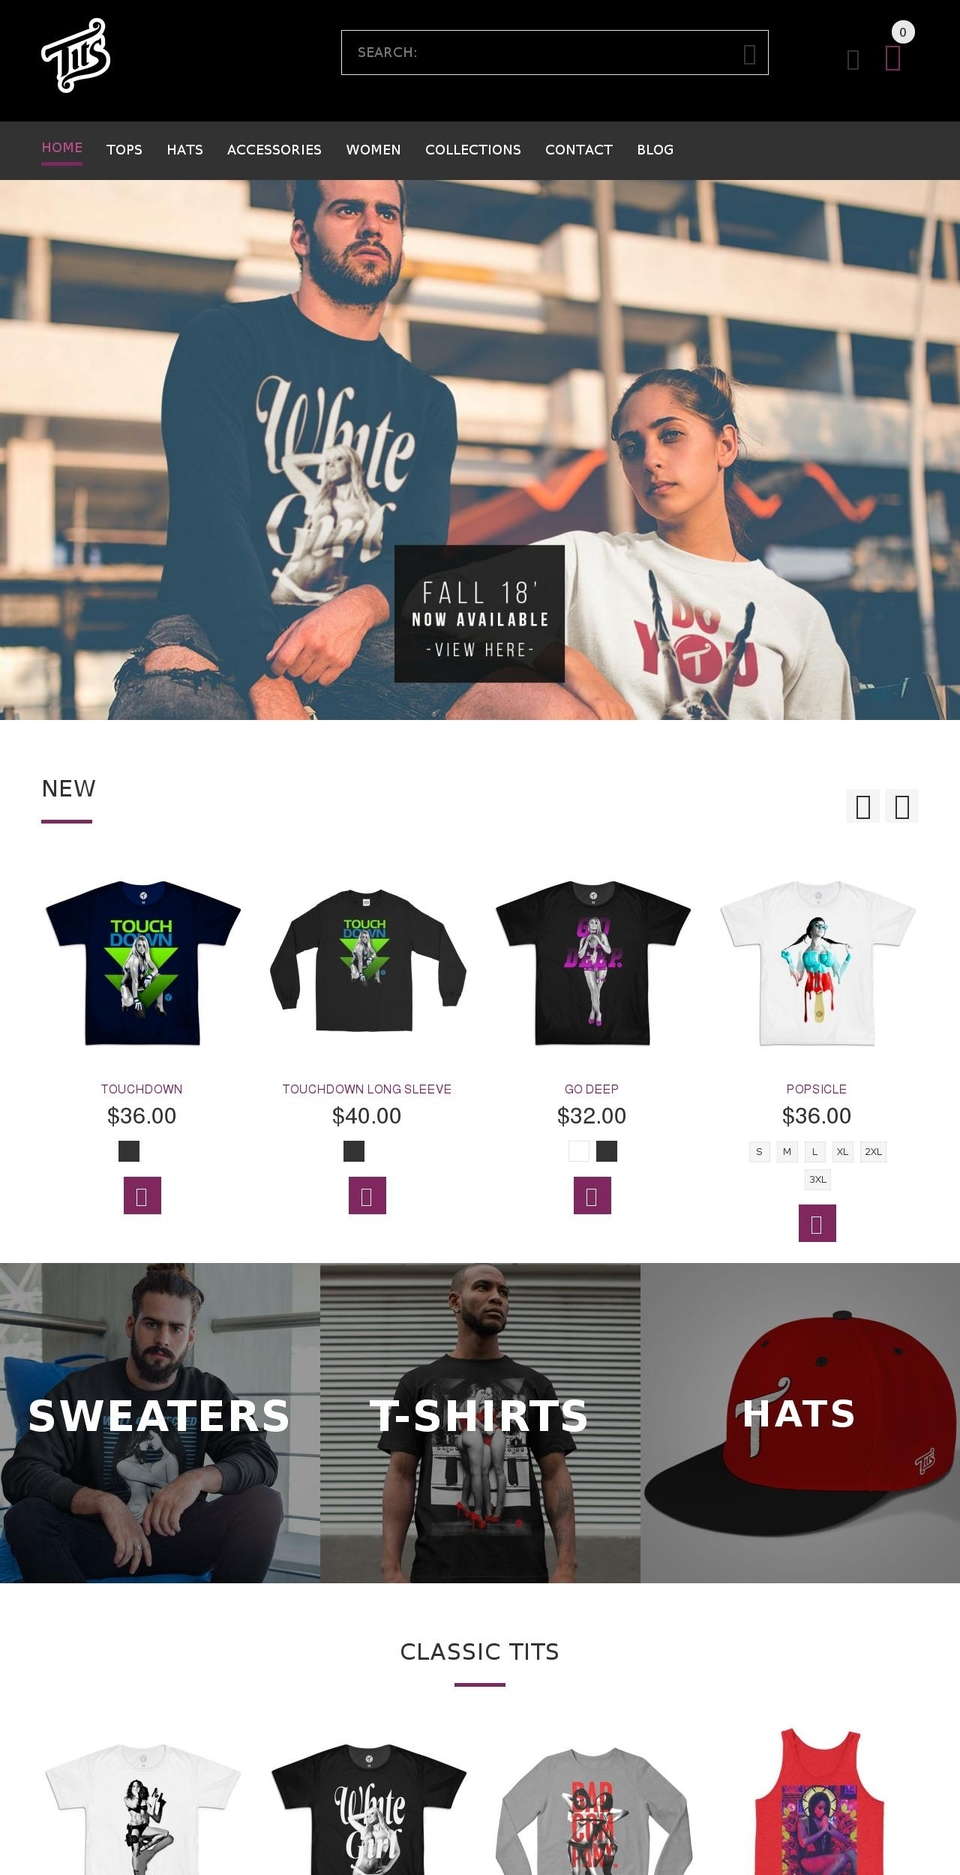 yourstore-v2-1-3 Shopify theme site example 2intheshirt.com